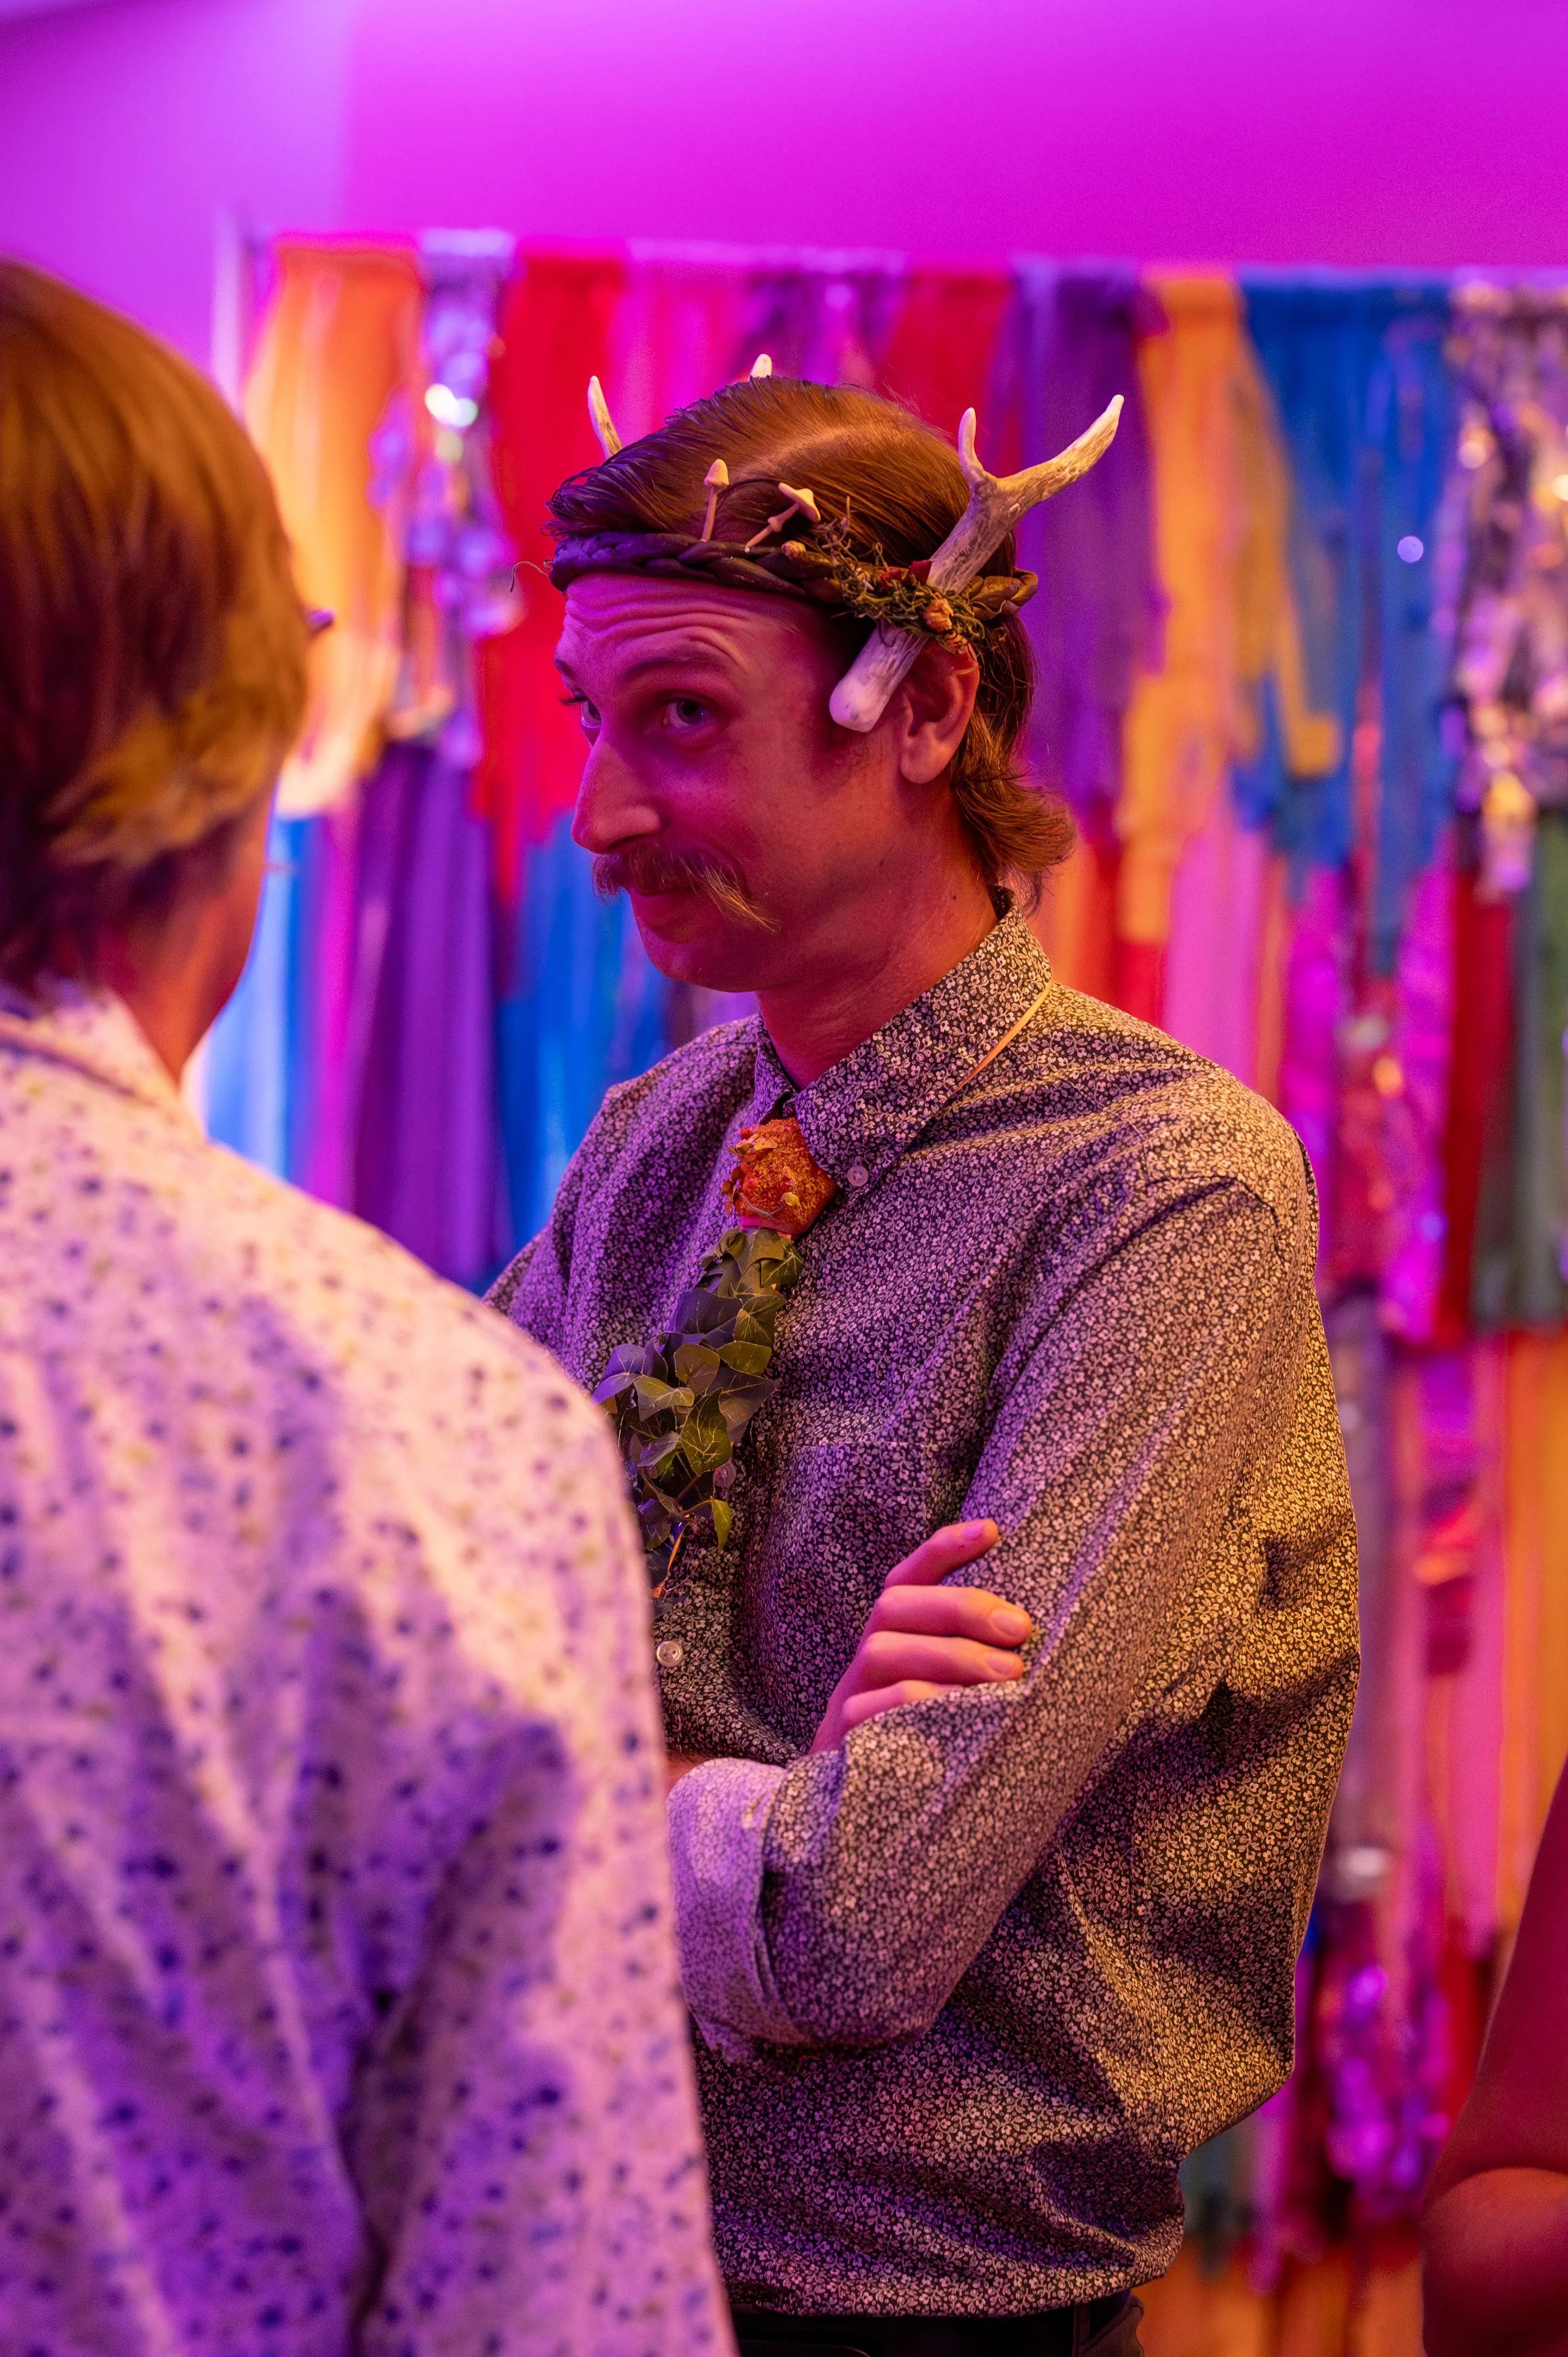 Person wearing a headband with horns talking to another person in a brightly lit purple room with colorful curtains in the background.